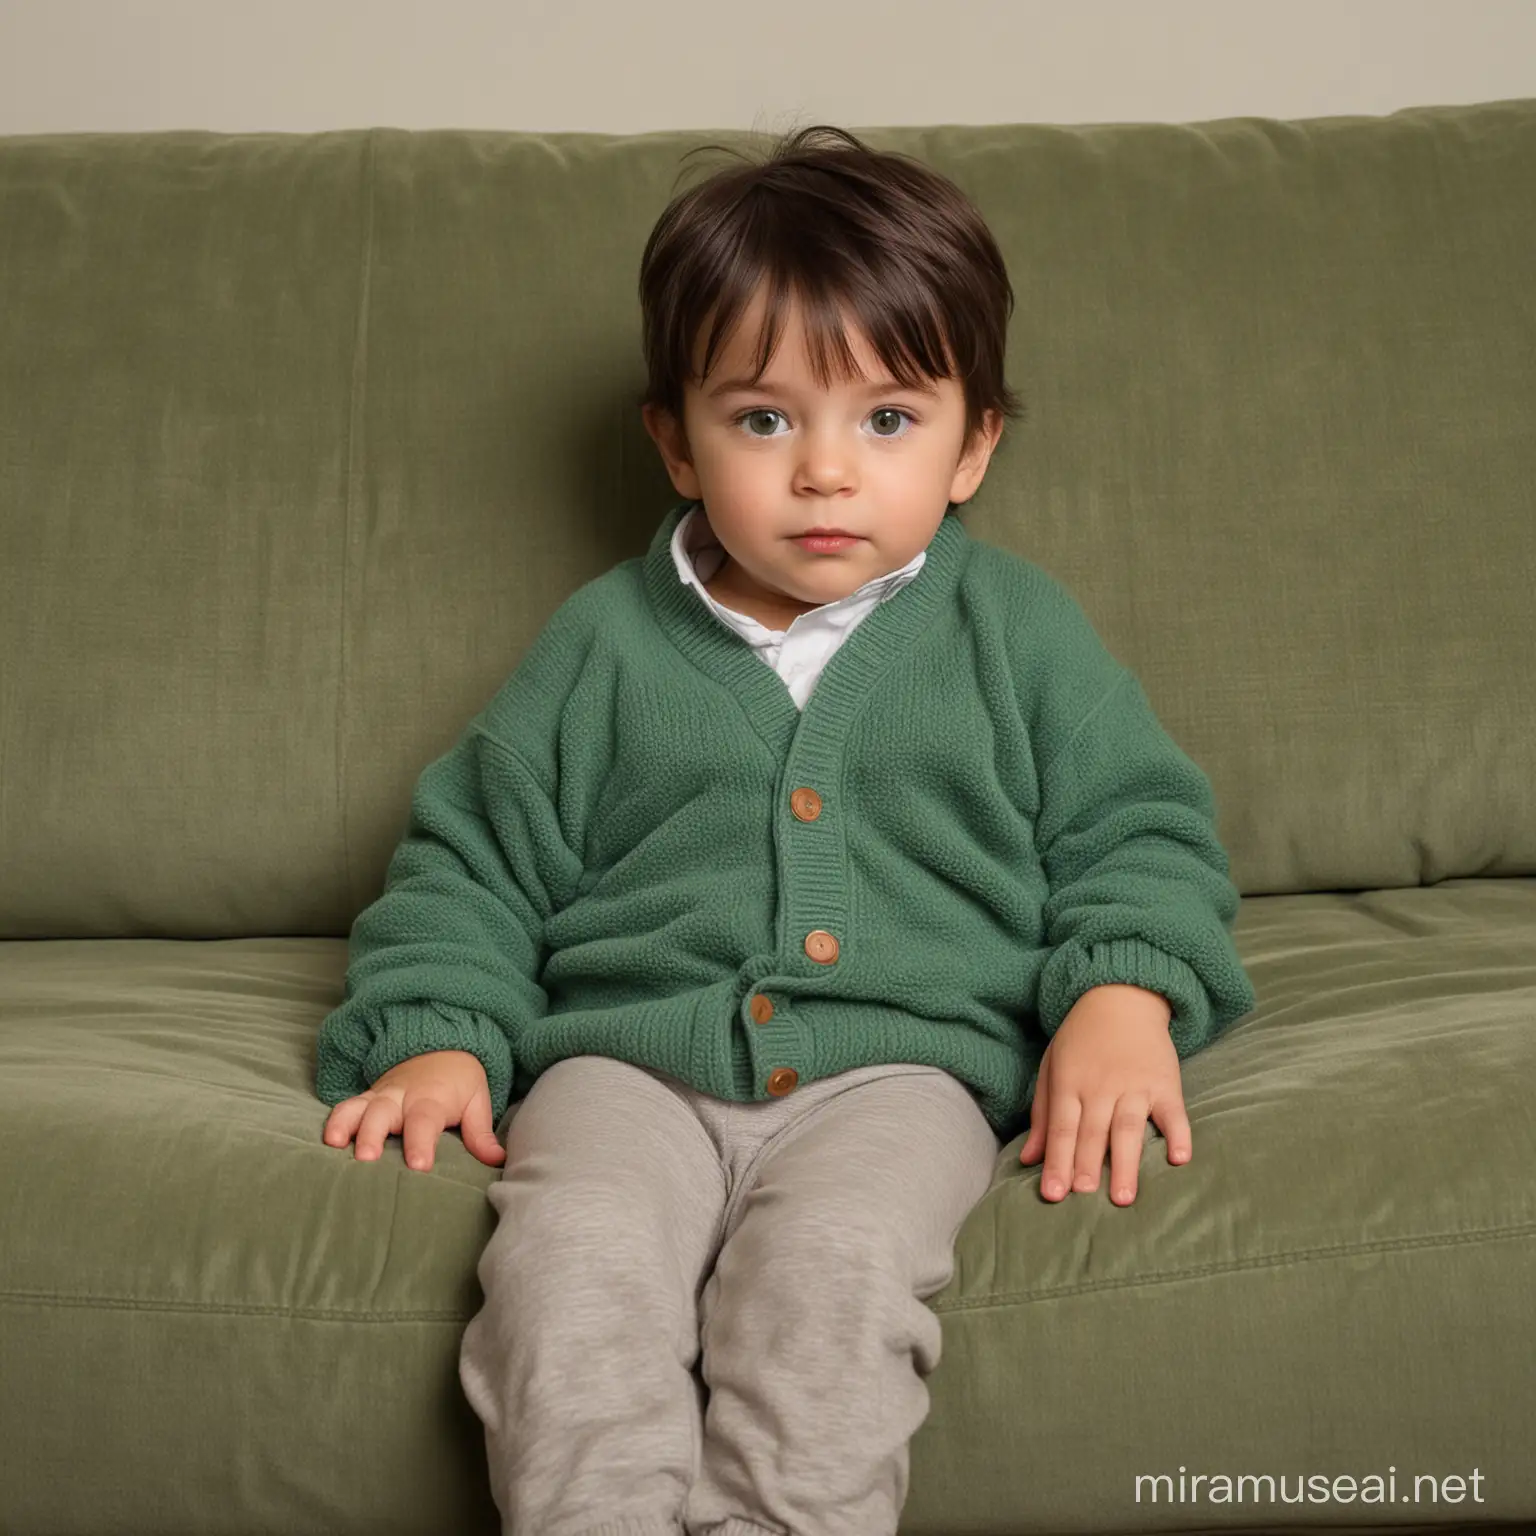 Cute Toddler Lounging on Couch in Cozy Attire